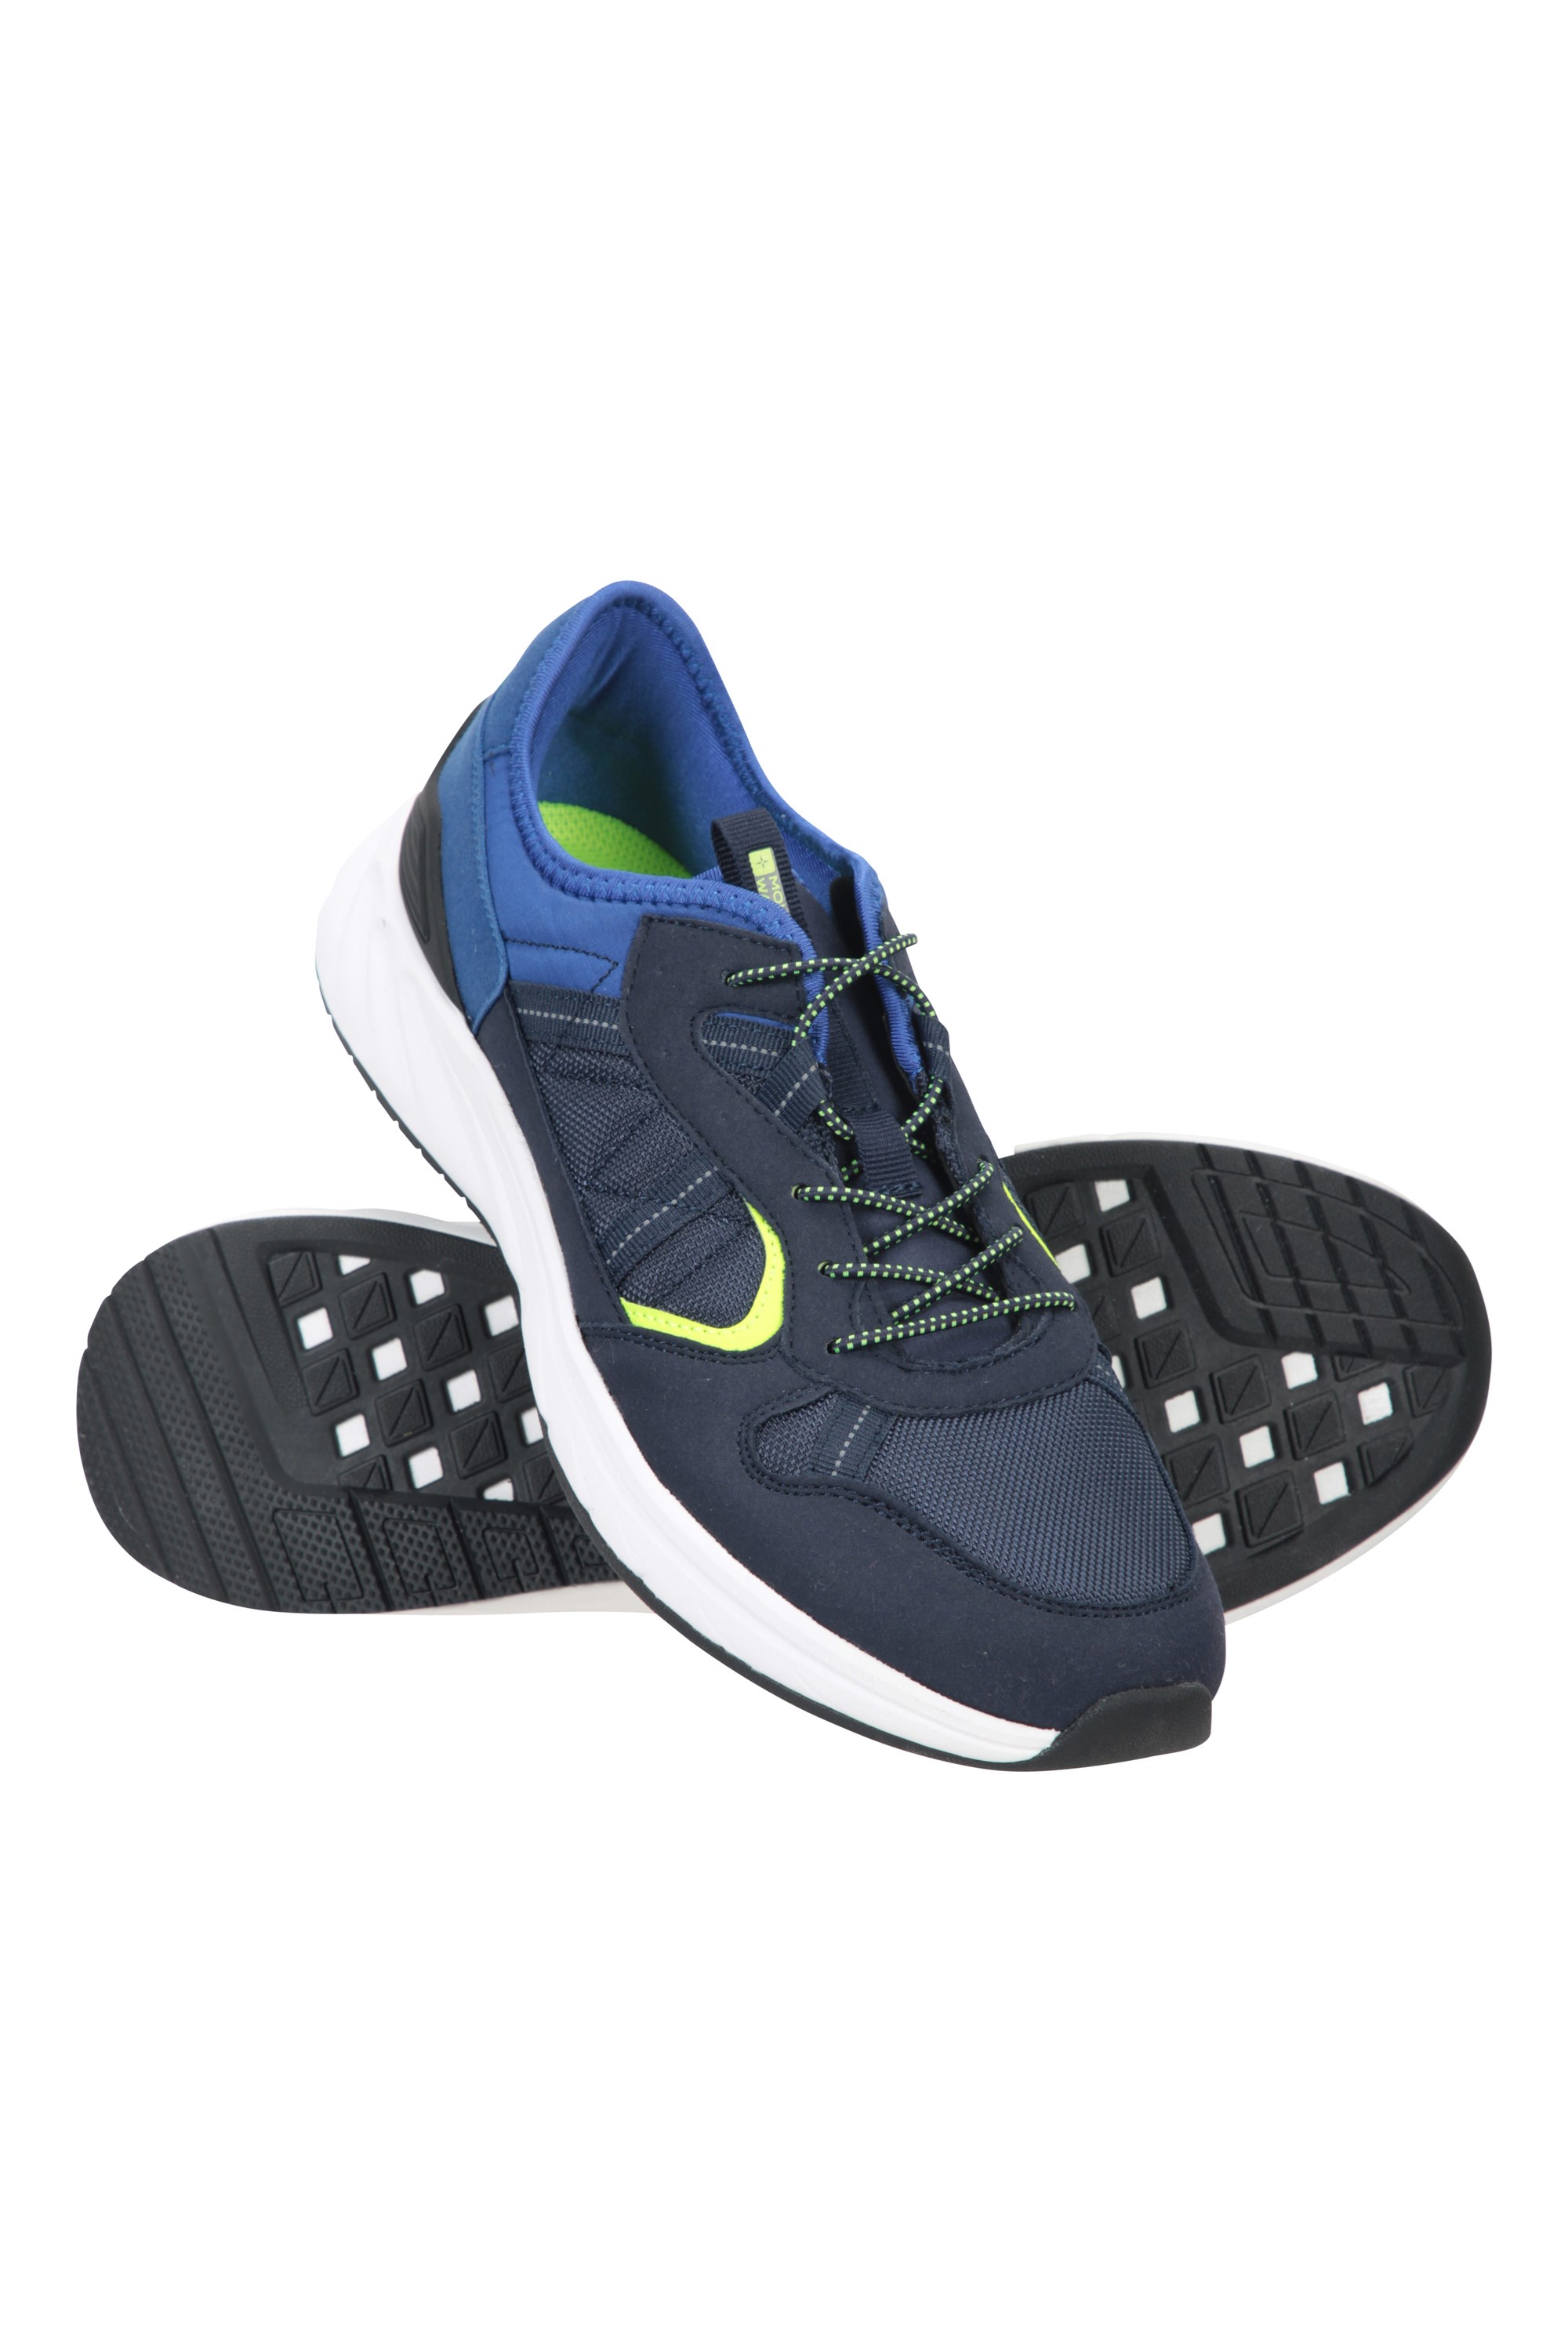 City To Street Mens Running Shoes - Blue